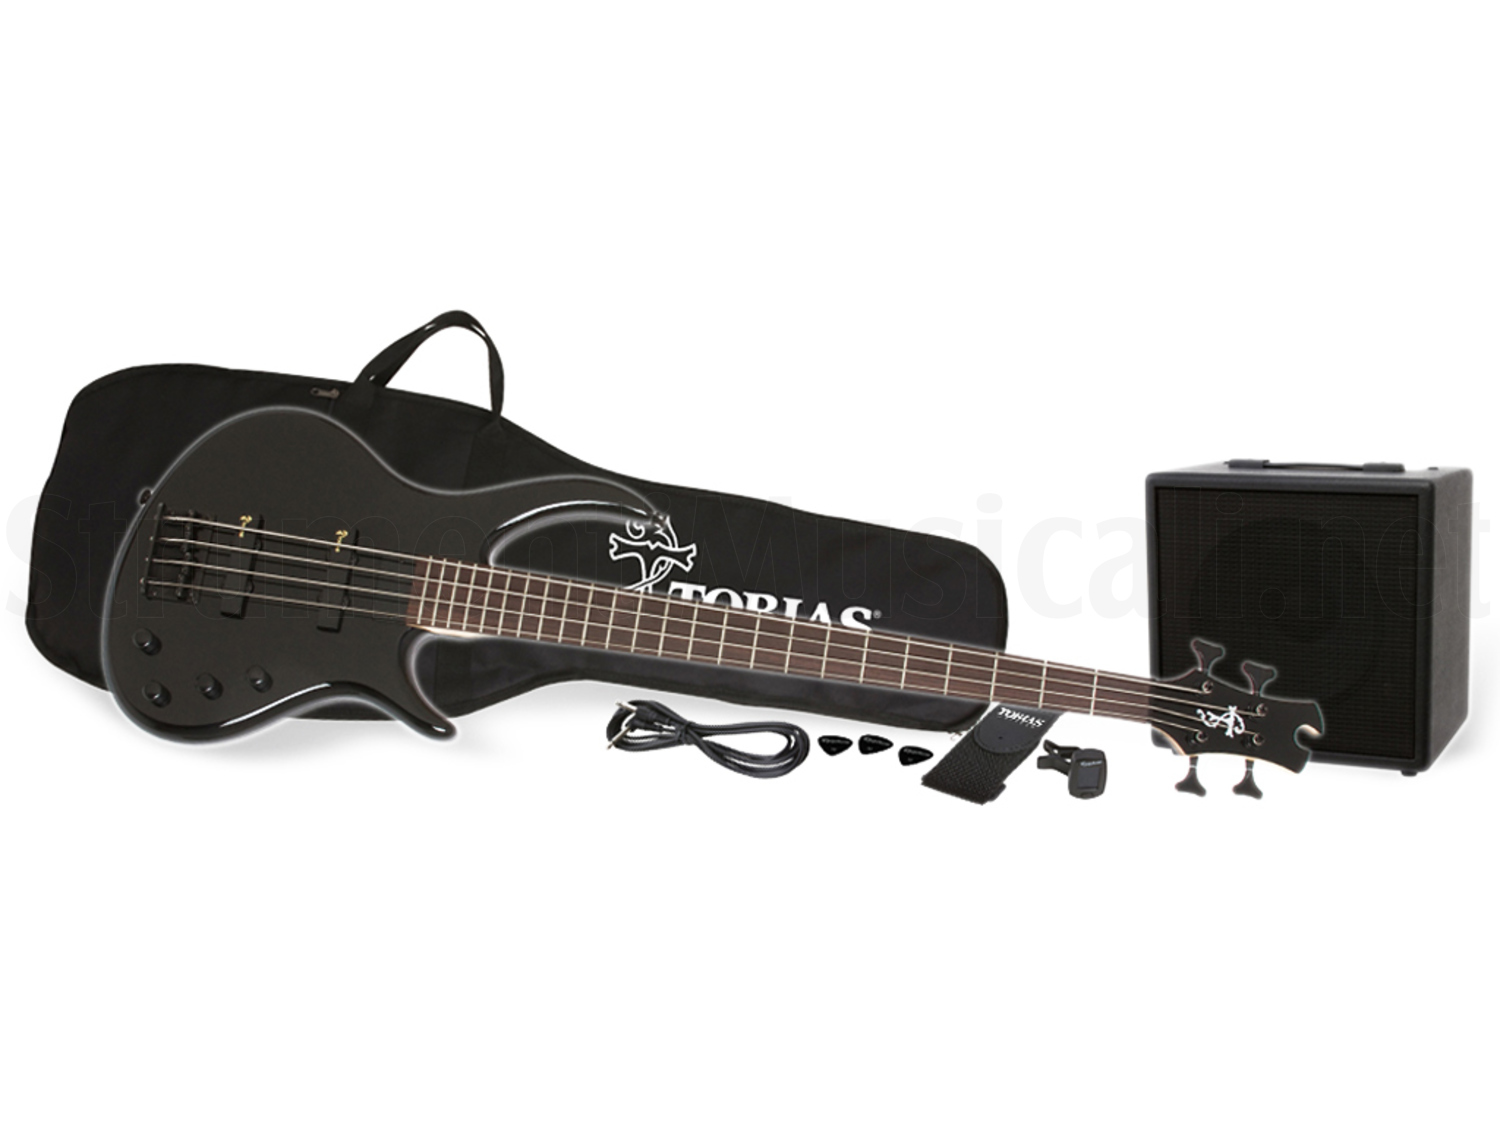 Epiphone toby bass performance pack ebony review